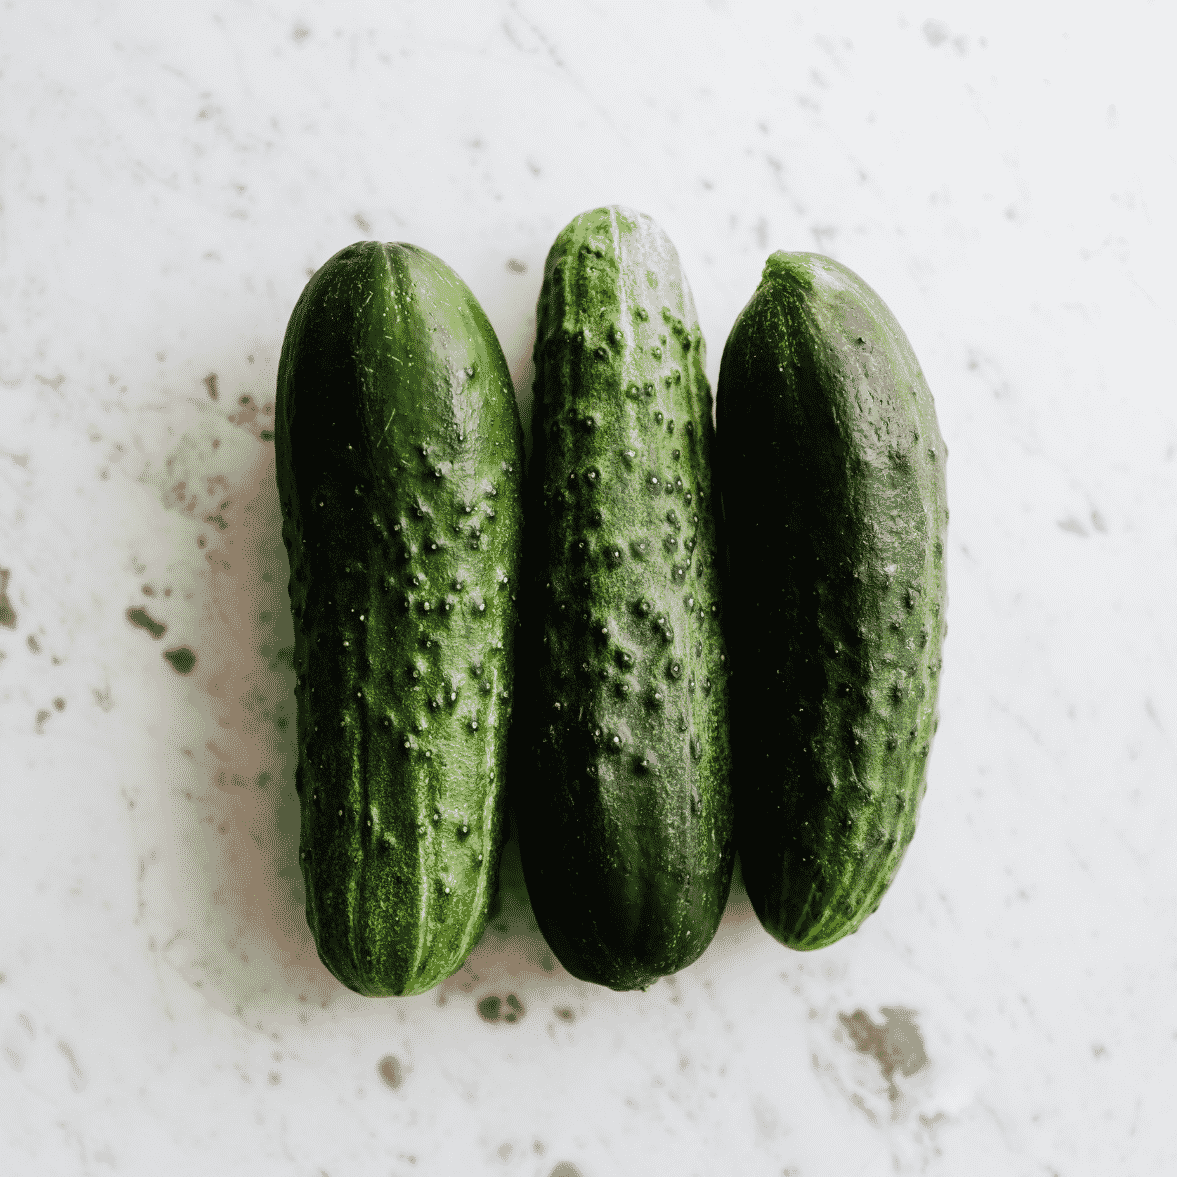 Cucumbers: Nutrition facts & health benefits